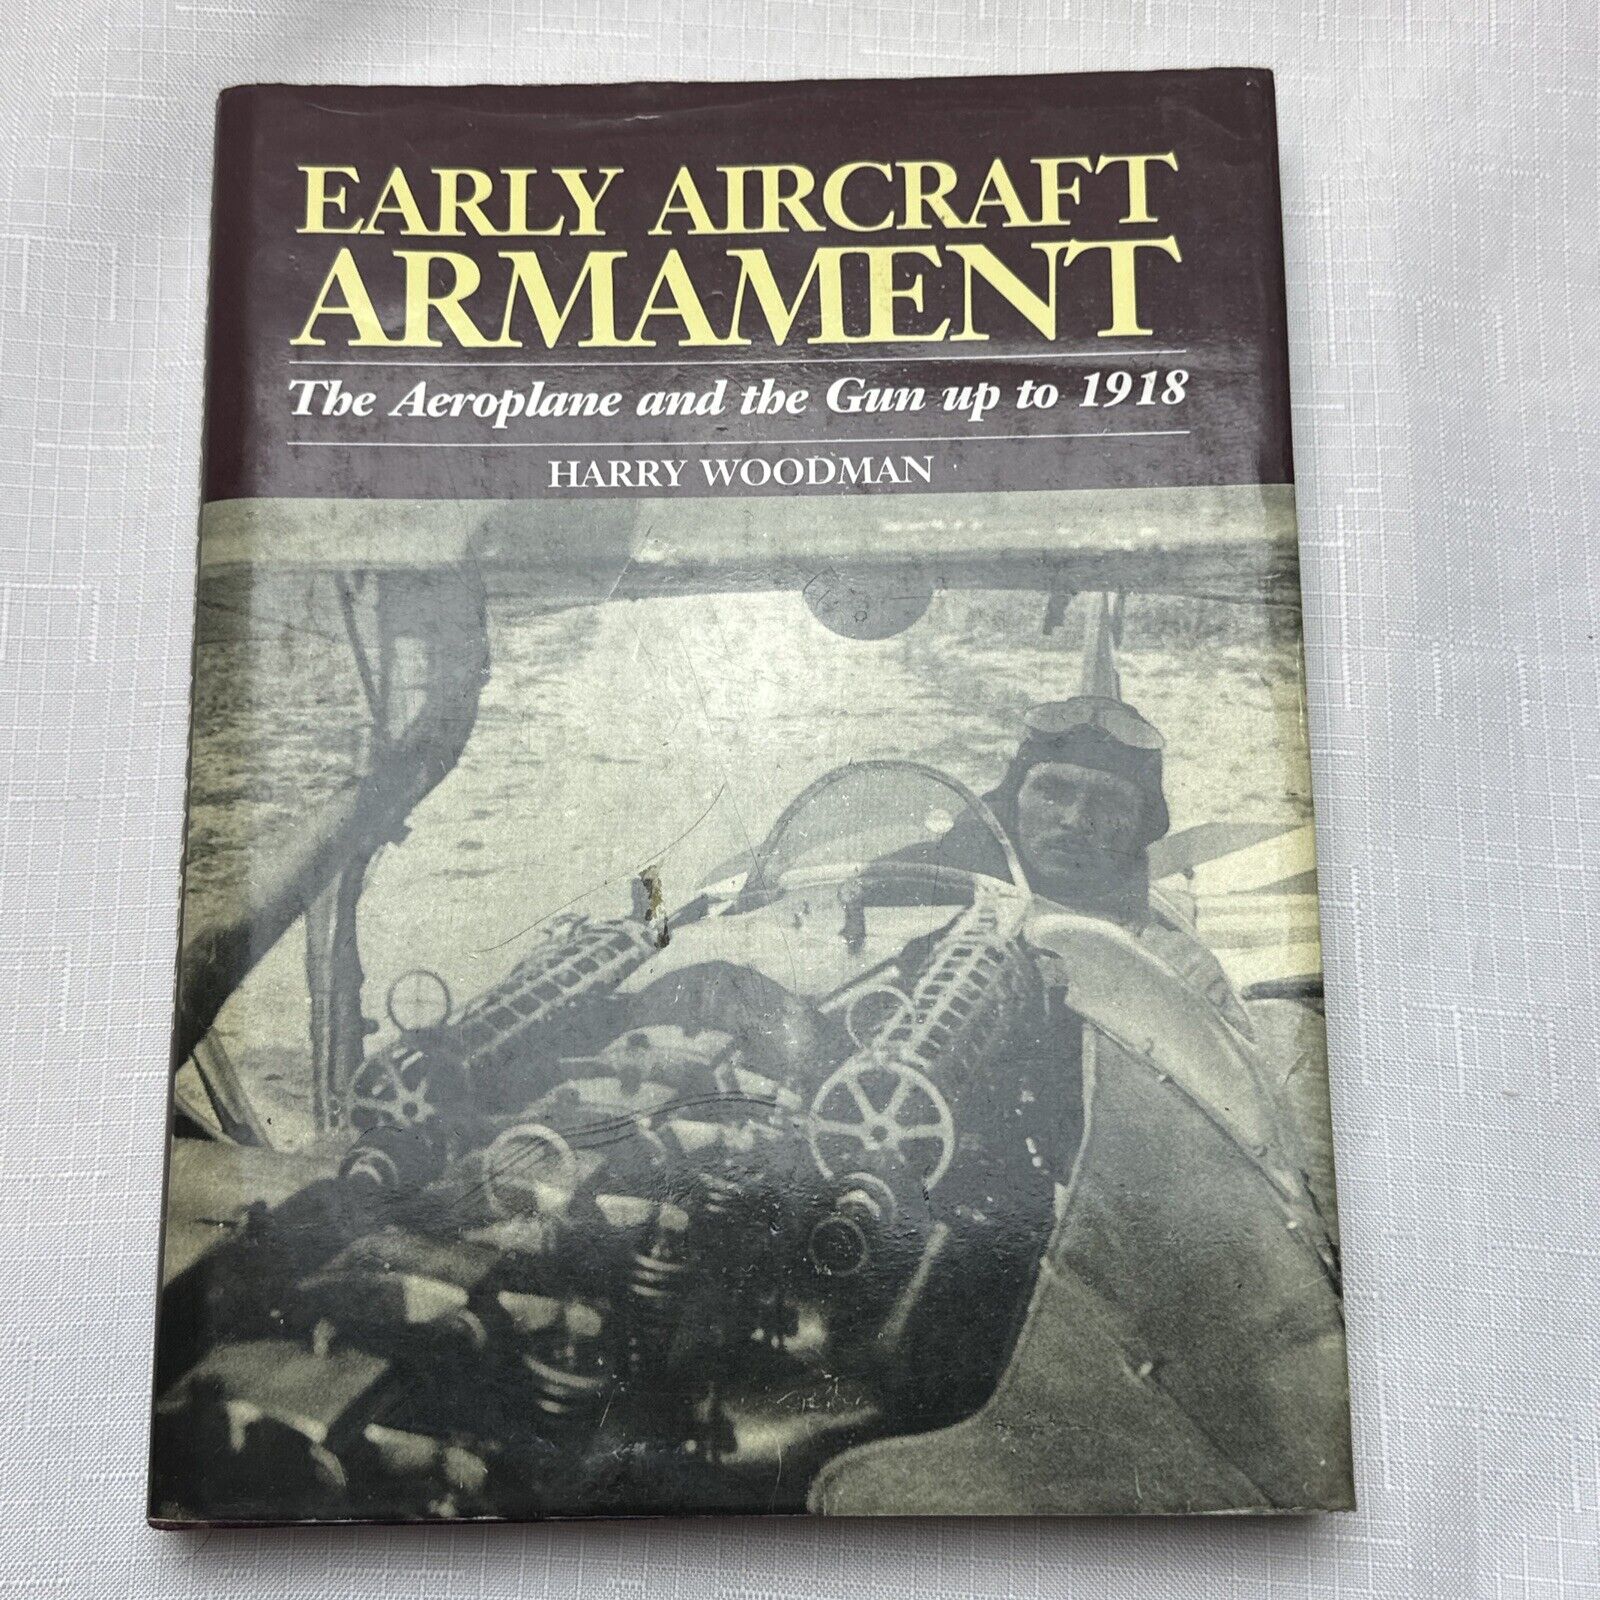 Early Aircraft Armament by Harry Woodman - 1st Edition - 1st Printing